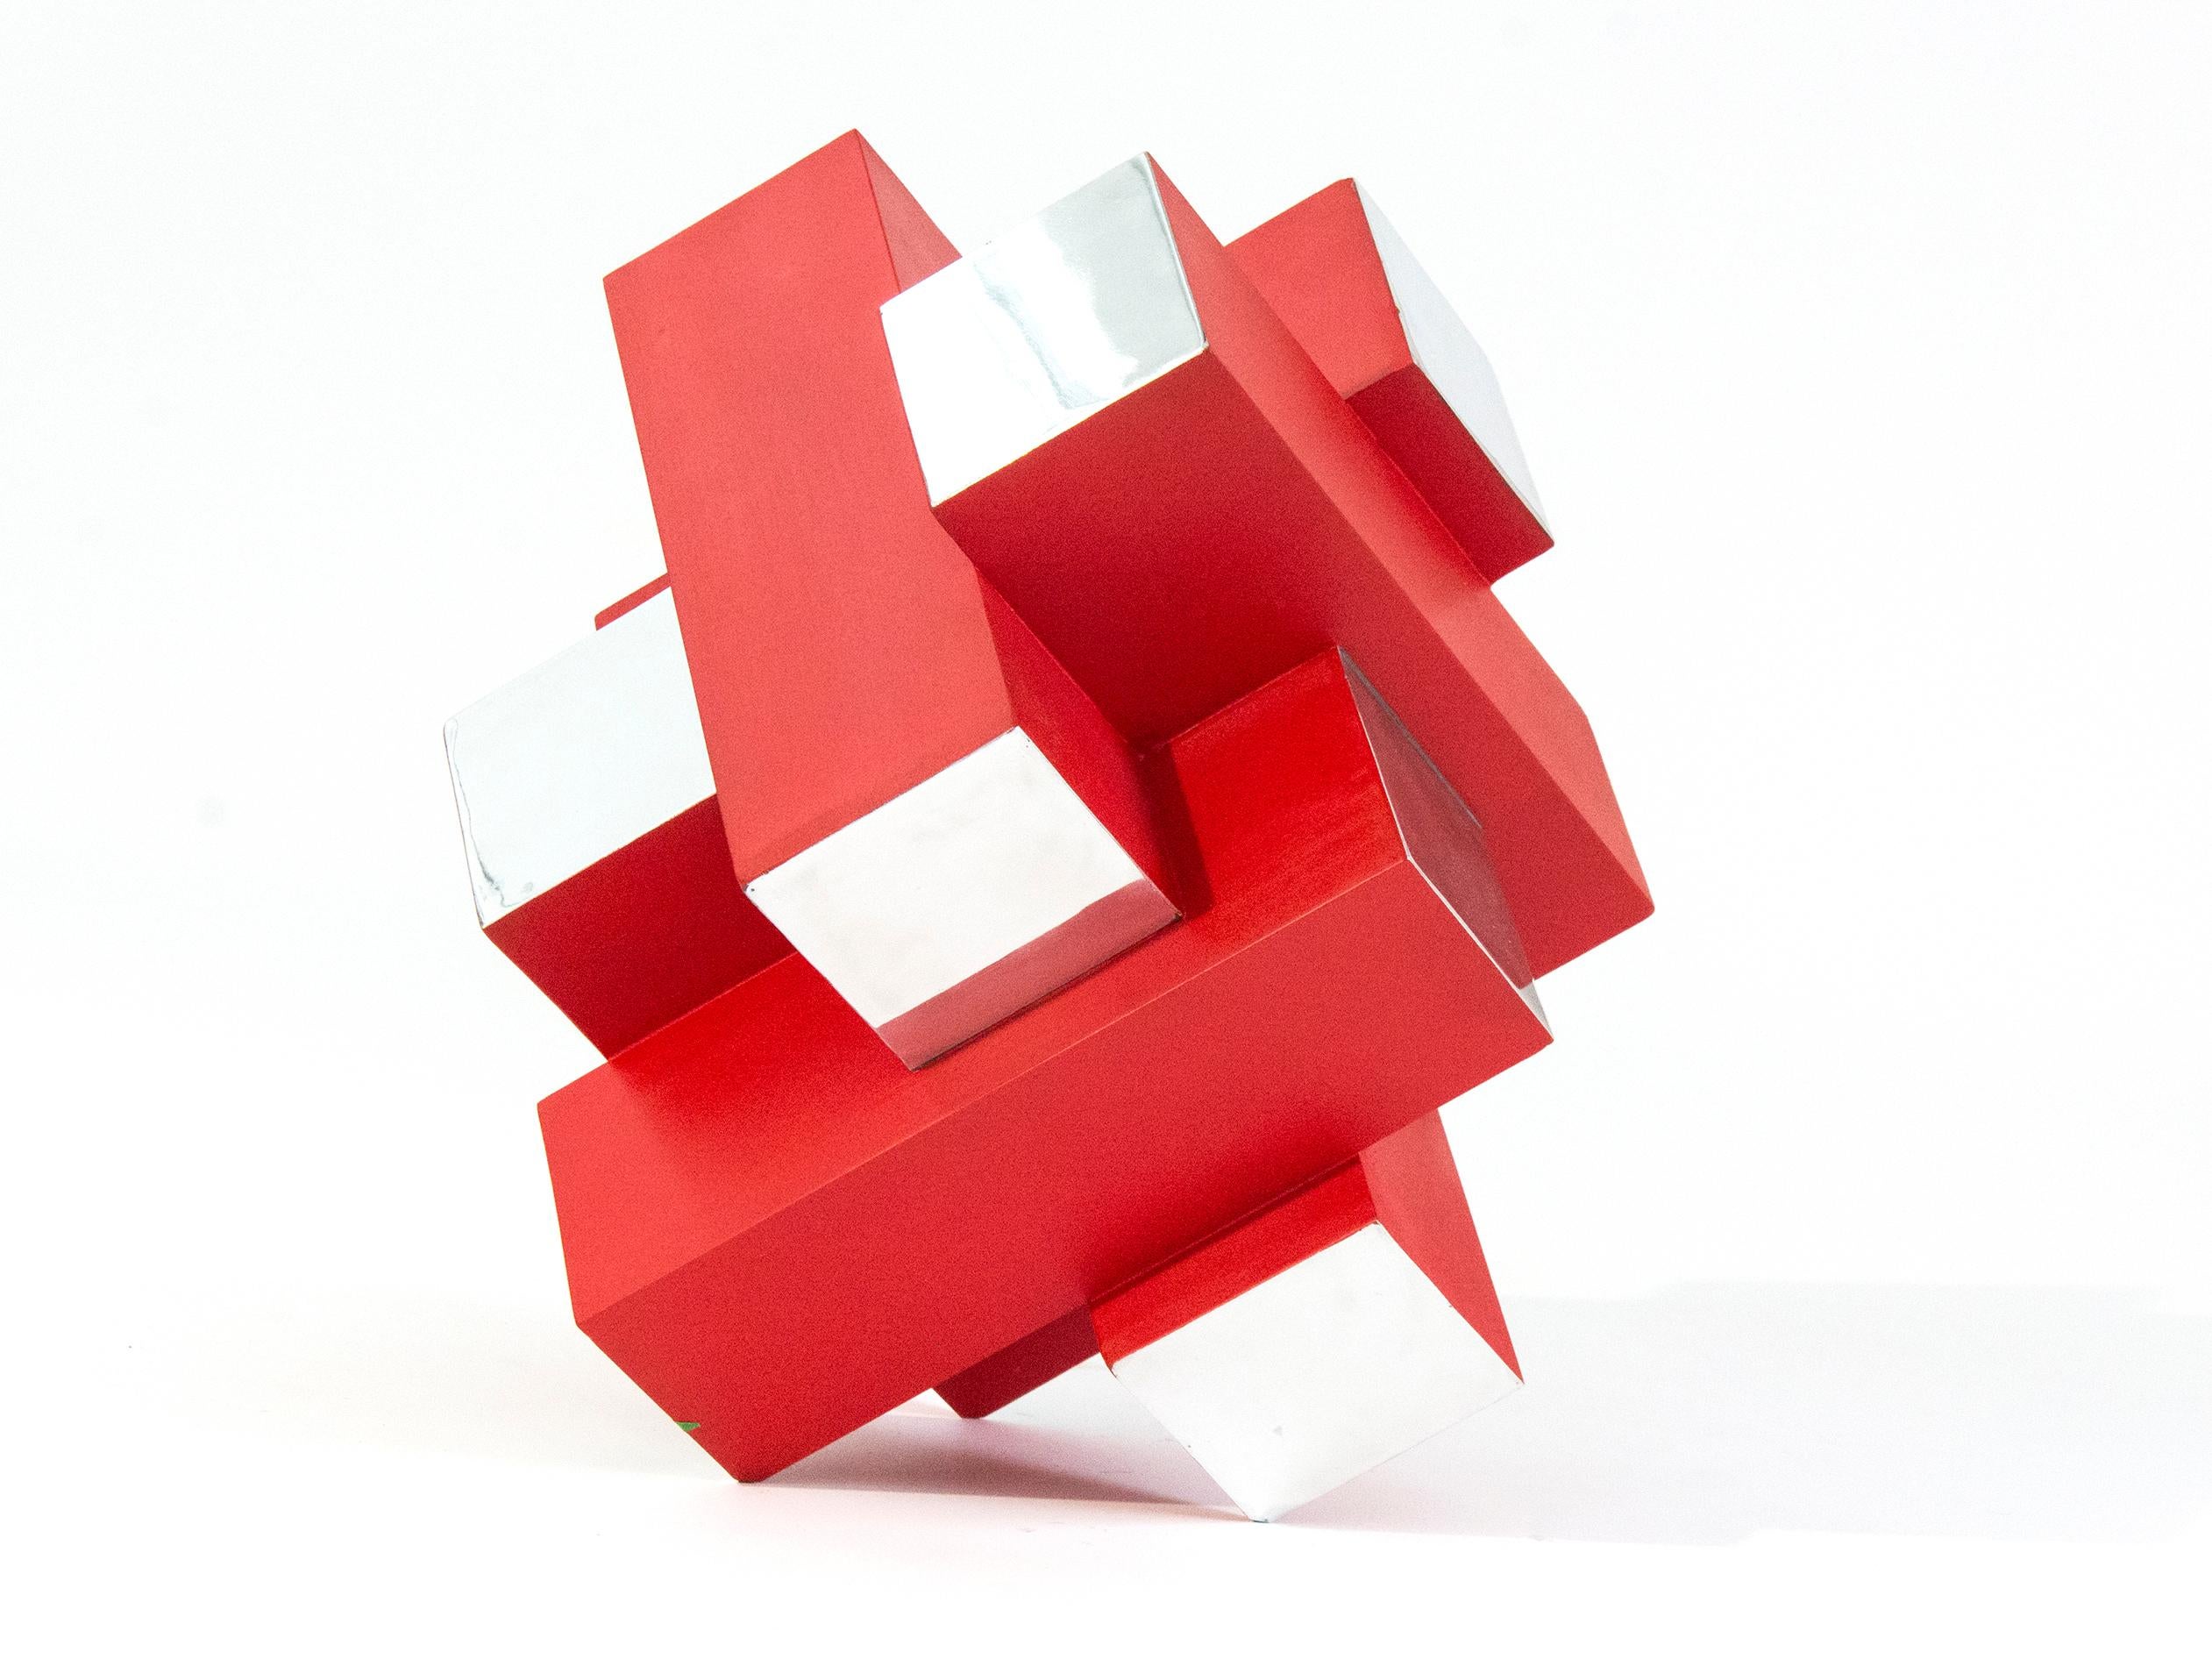 15 Inch Cube Red 2/10 - bright, Intersecting geometry, aluminum modern sculpture - Sculpture by Philippe Pallafray